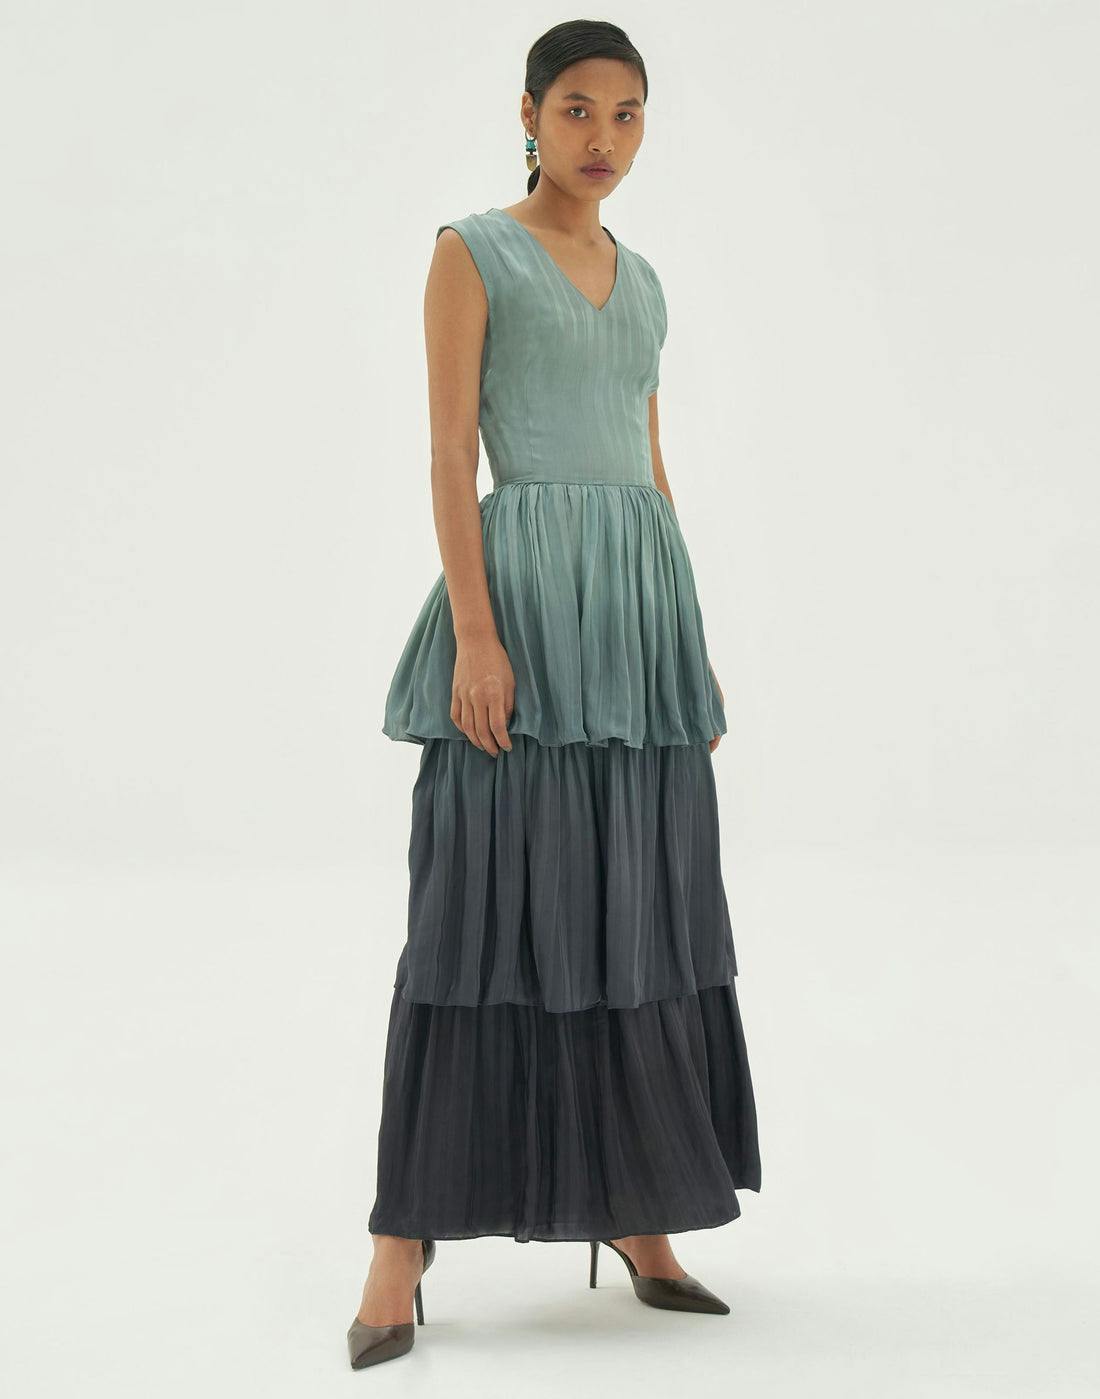 Layered ombre dress, a product by Corpora Studio